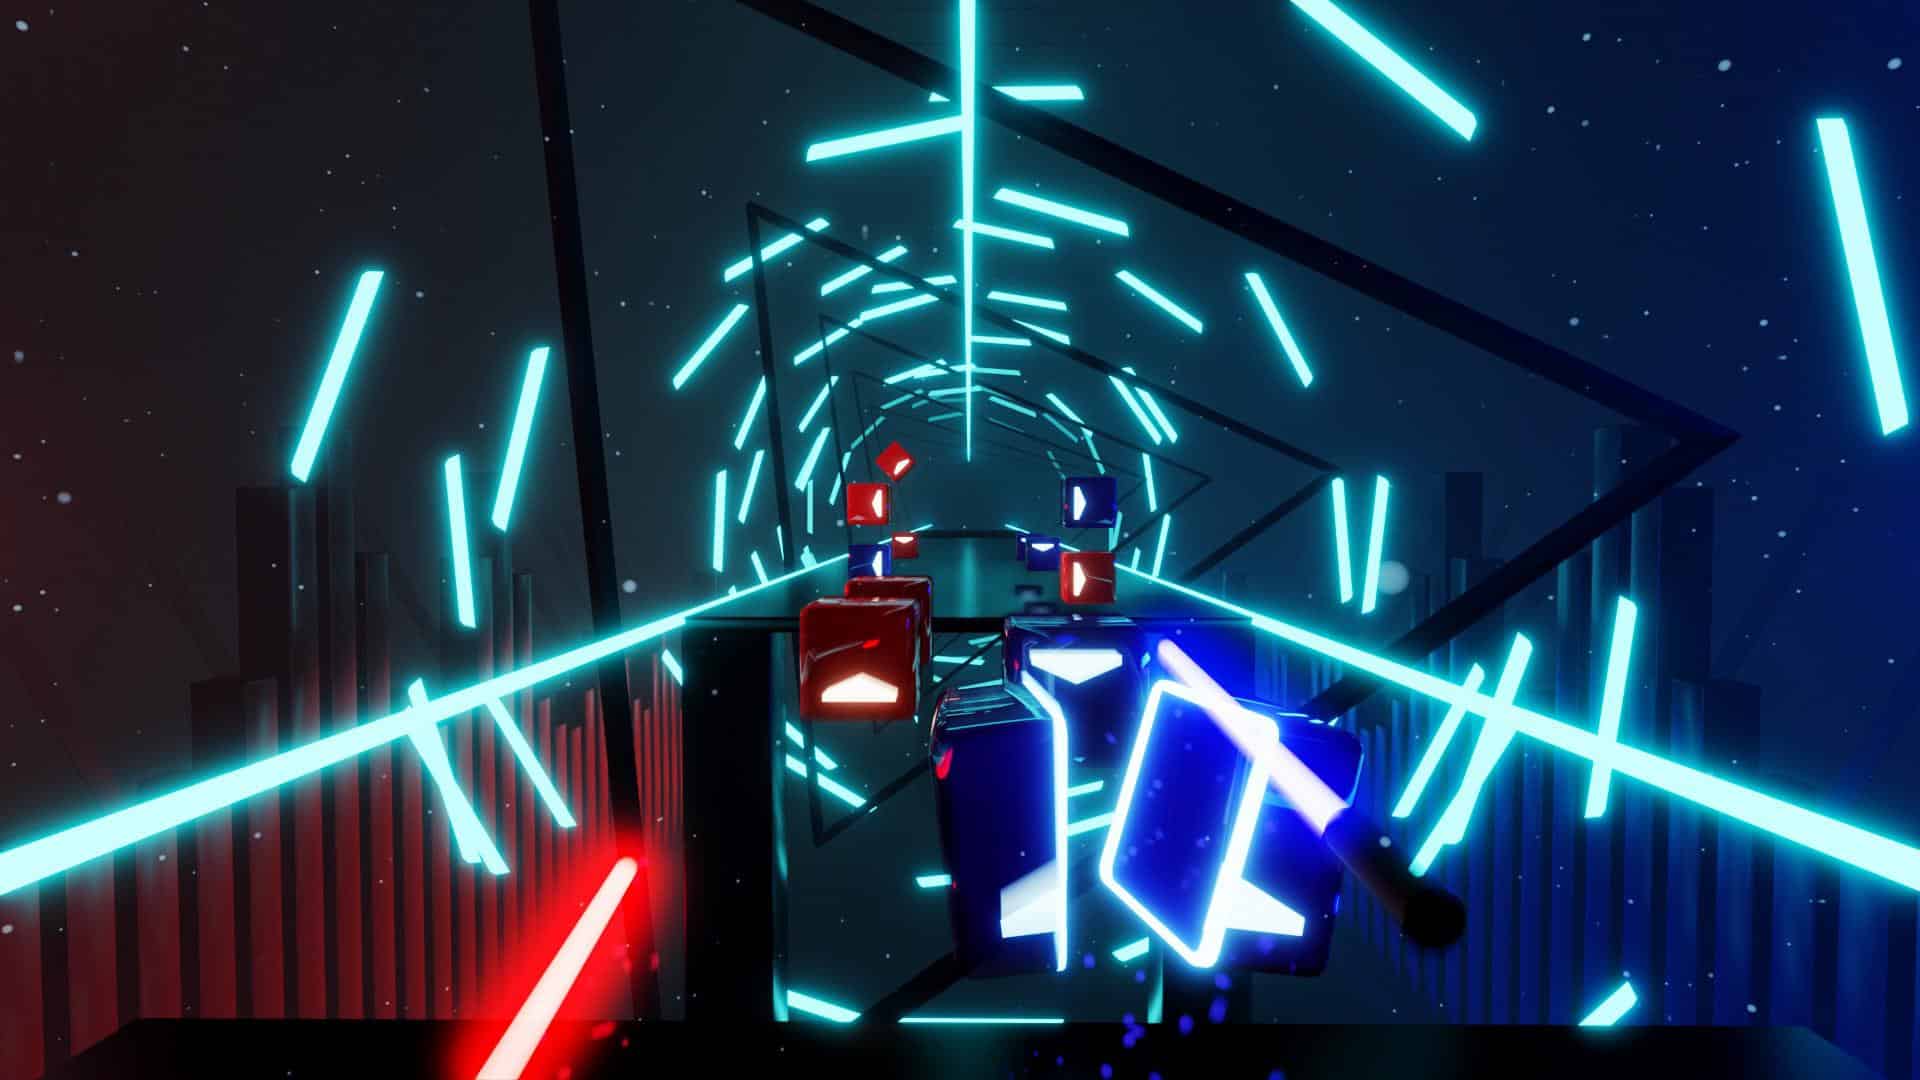 beat saber aggiornamento 1.13.4 feature playstation vr